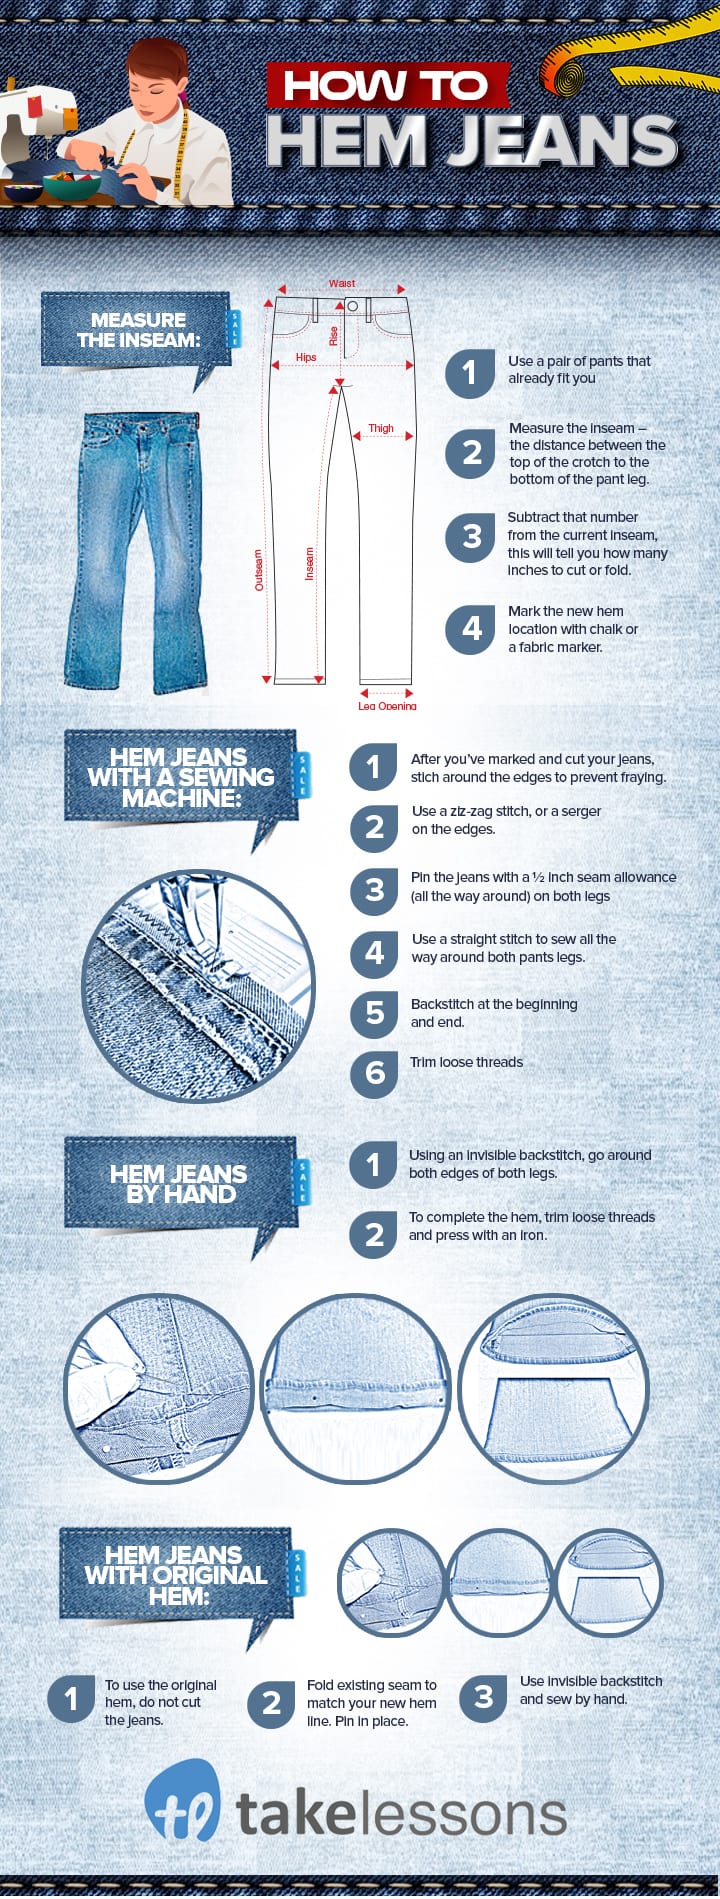 How to Hem Jeans by Hand or Sewing Machine Step by Step [Infographic]